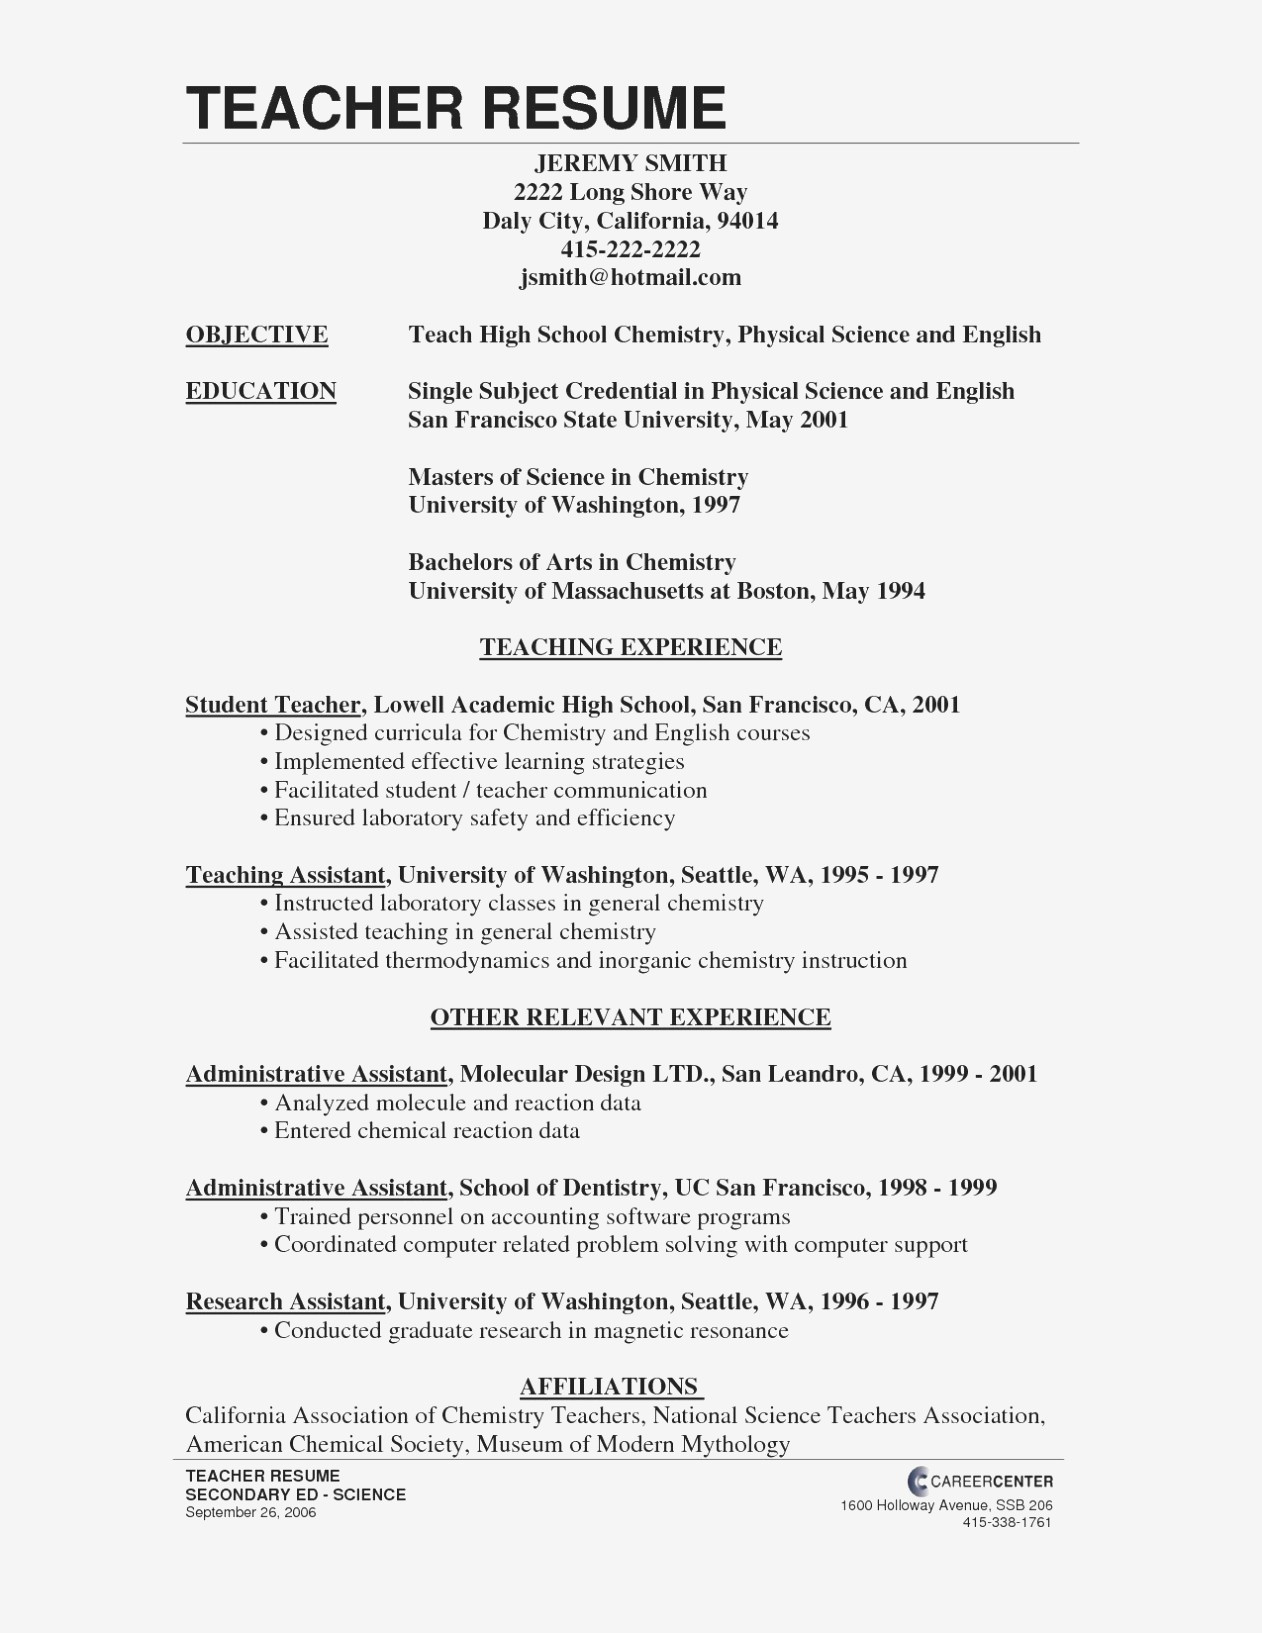 Customer Service Resume Examples Sample Cover Letter For Customer Service Professional Resume Samples Research Scientist New Professional Cover Letter Of Sample Cover Letter For Customer Service customer service resume examples|wikiresume.com